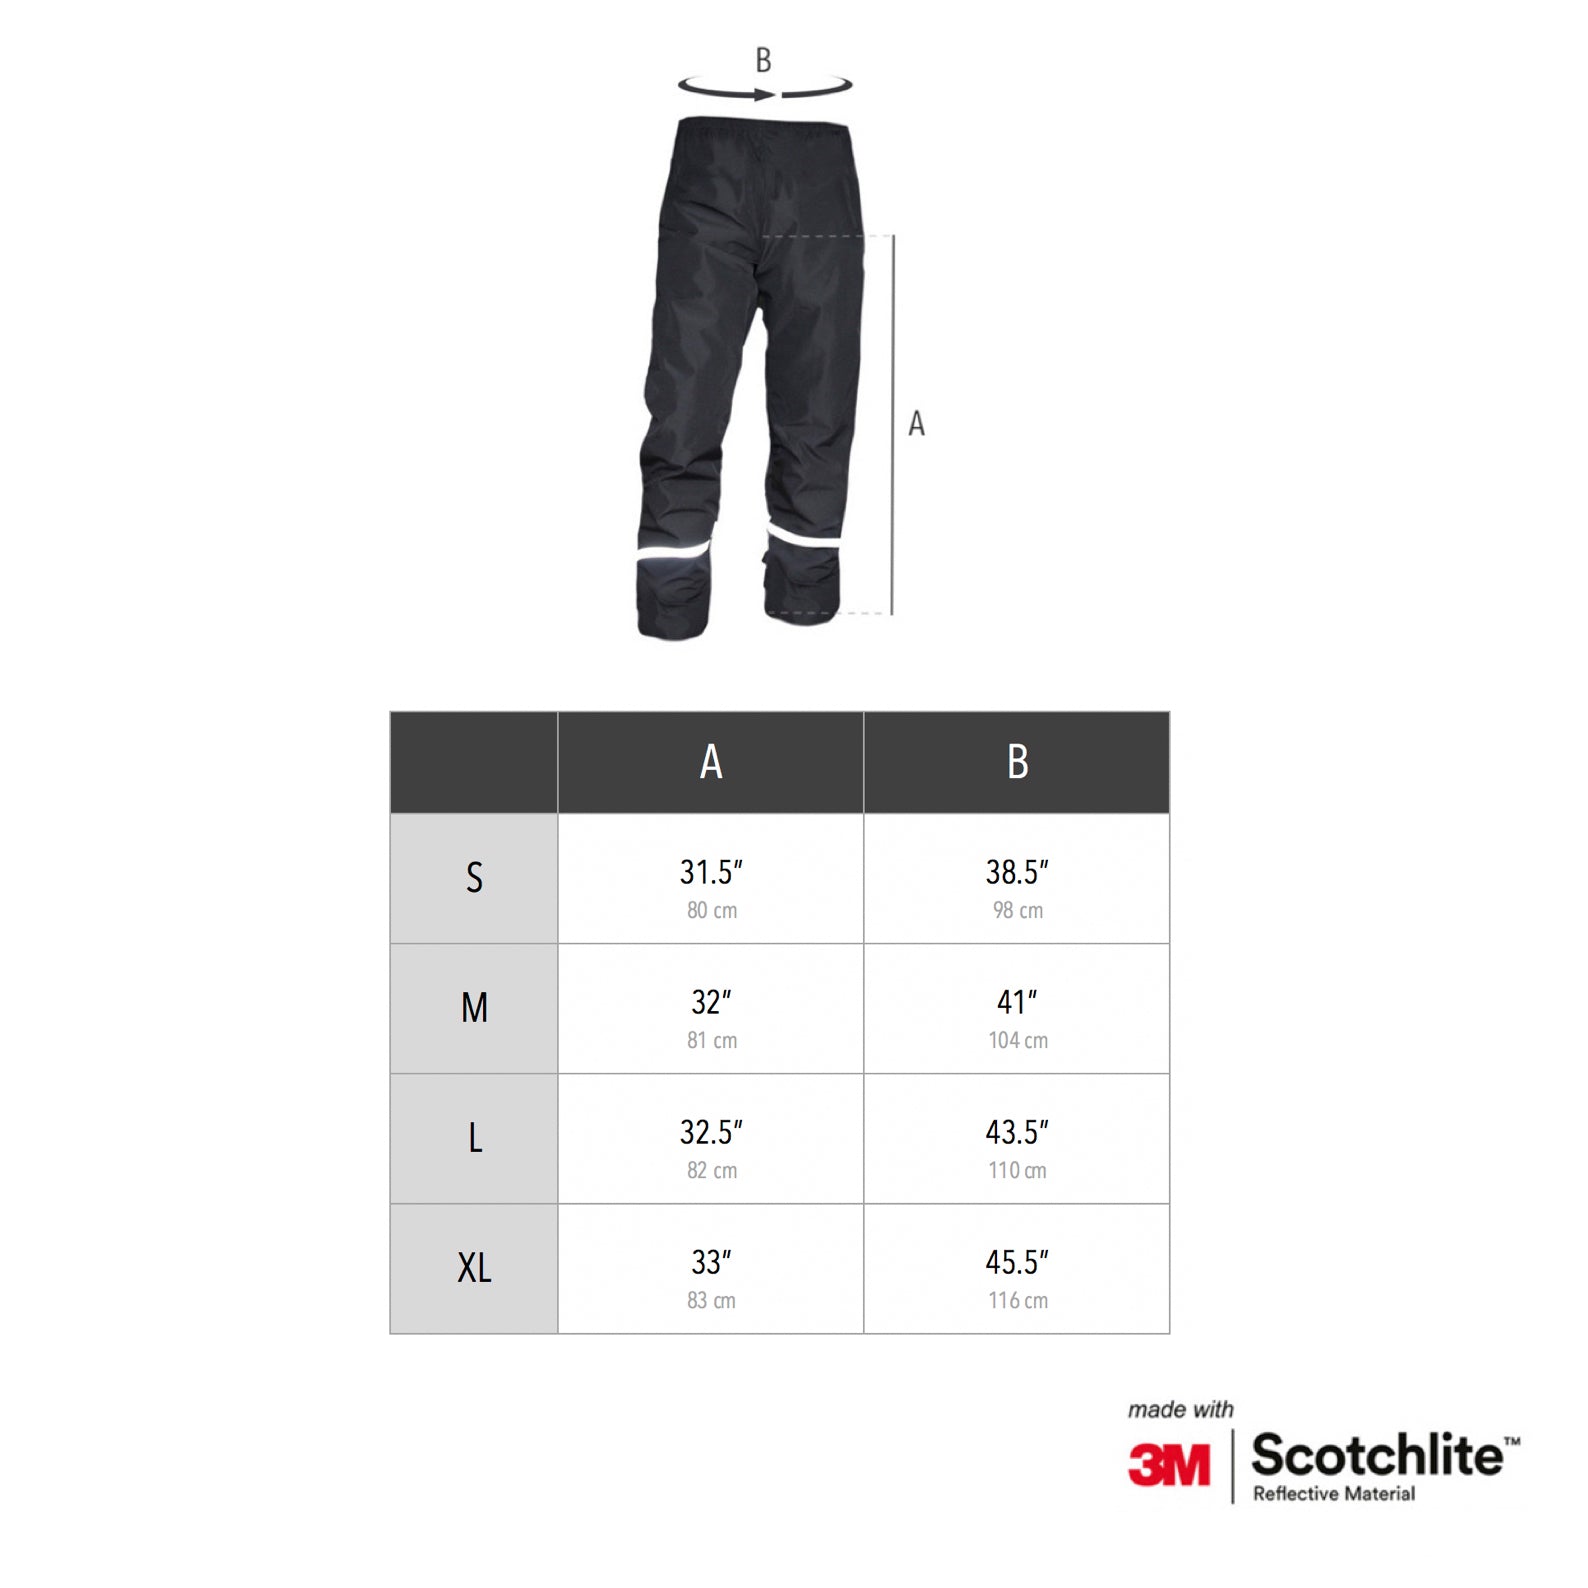 Chart showing the measurements for each size of the reflective rain pants.  